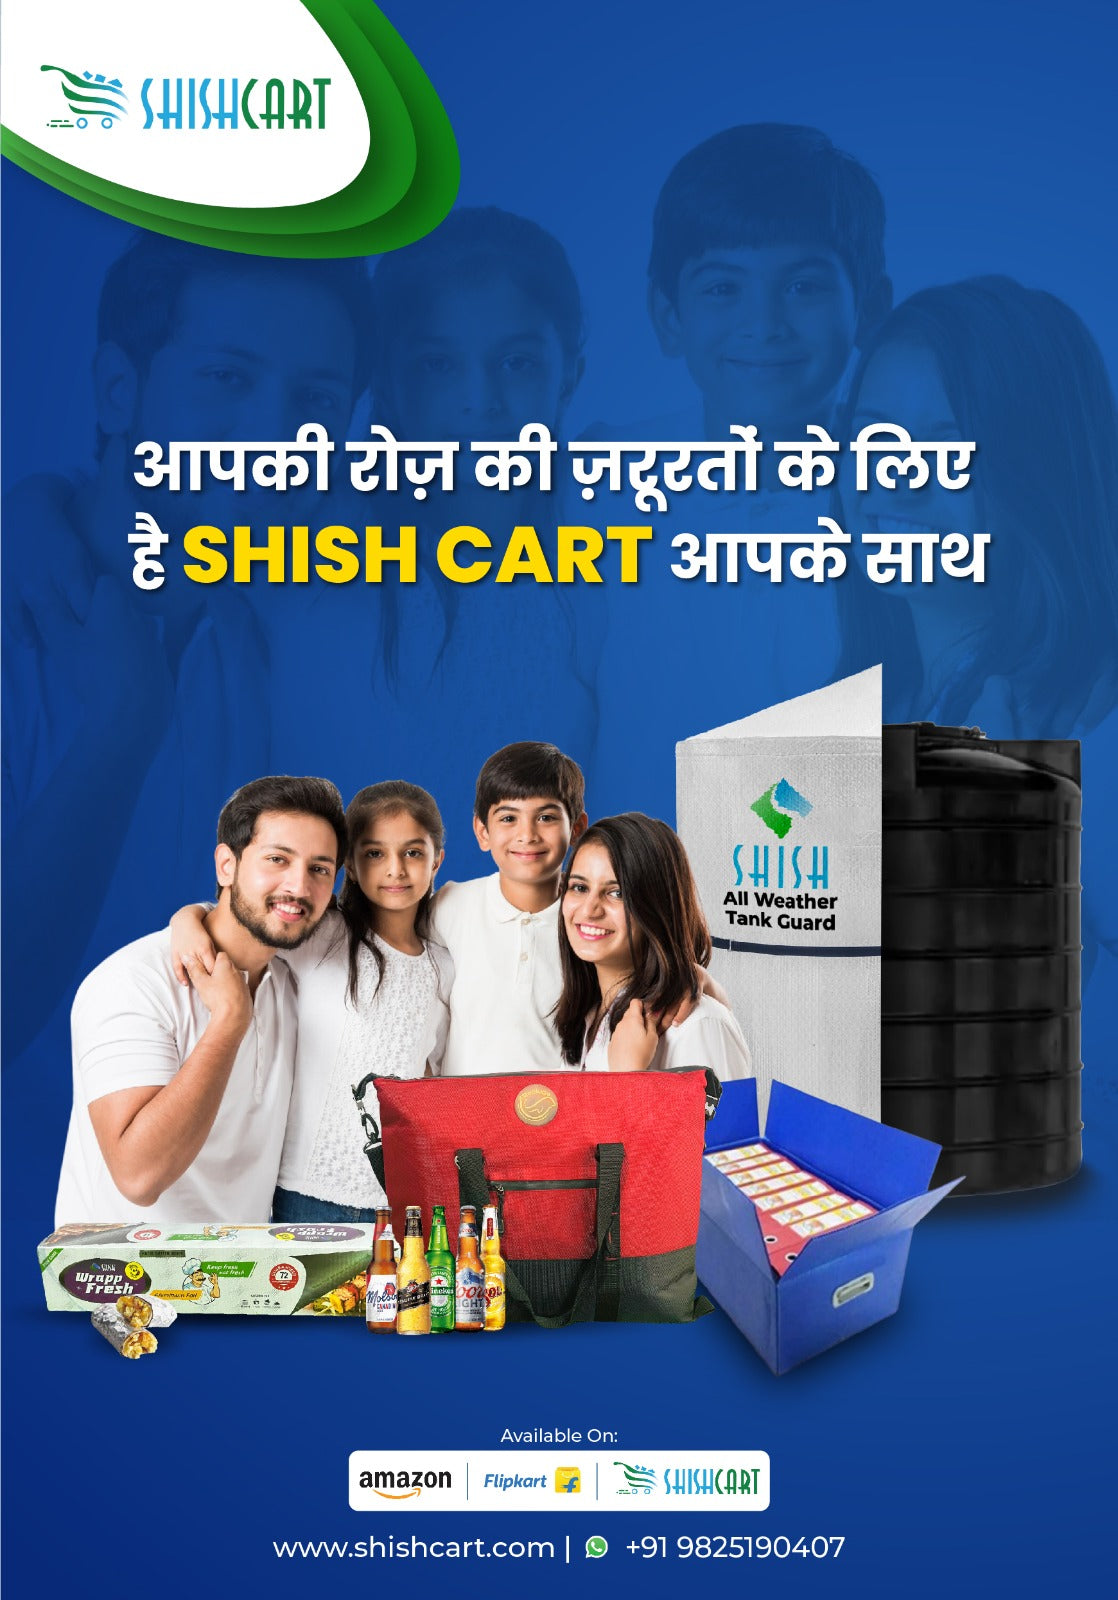 What products are there in ShishCart?